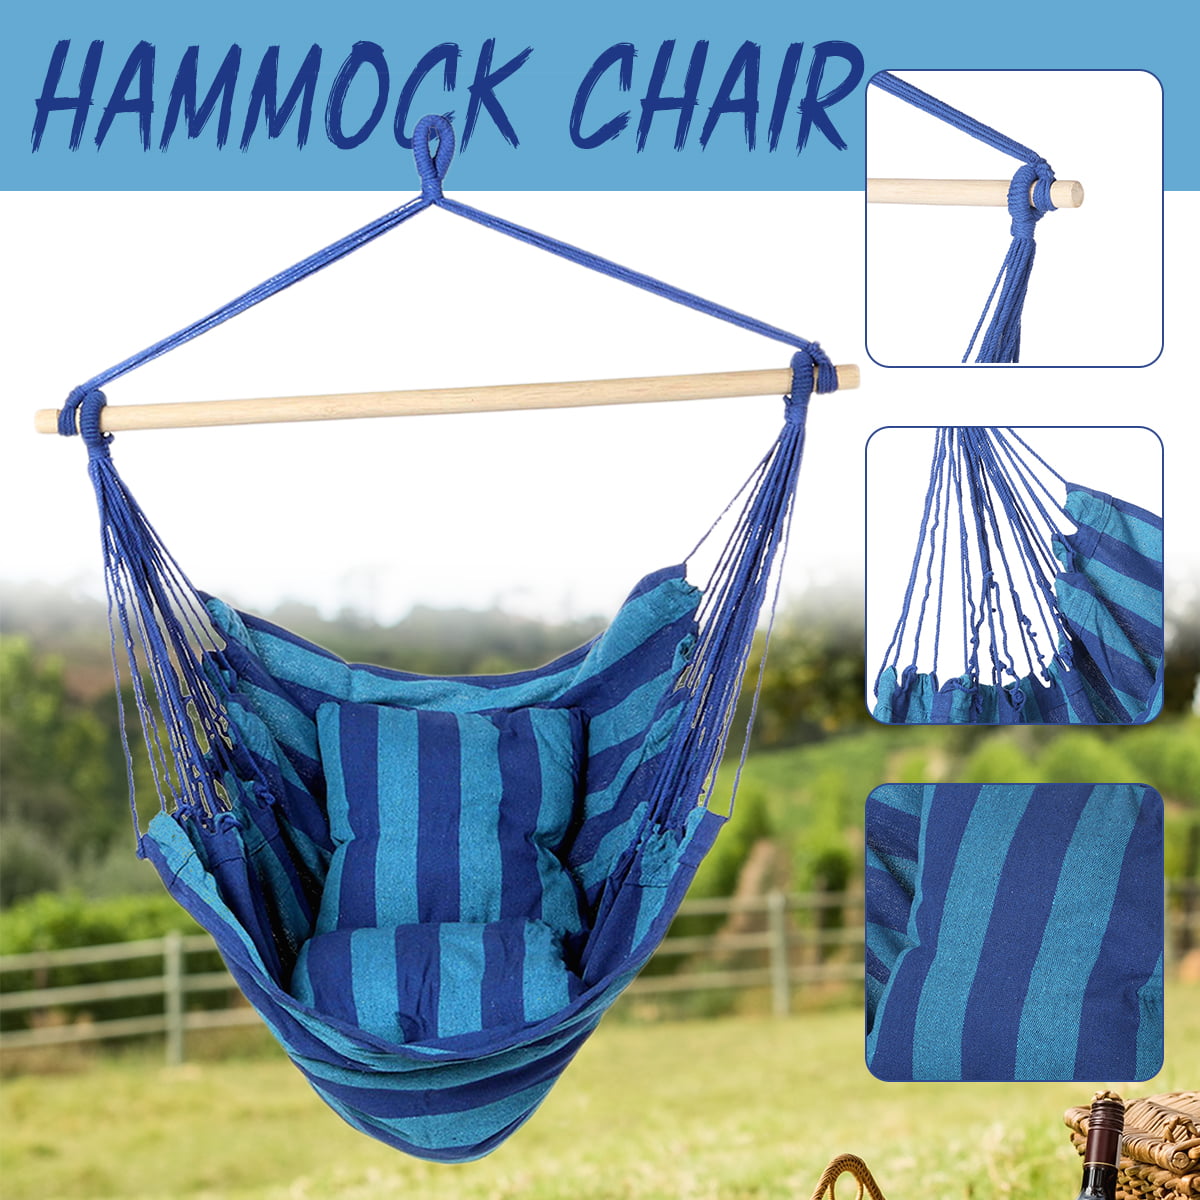 Hammock Hanging Rope Chair Swing Seat Patio Camping /w 2 Pillows Blue 